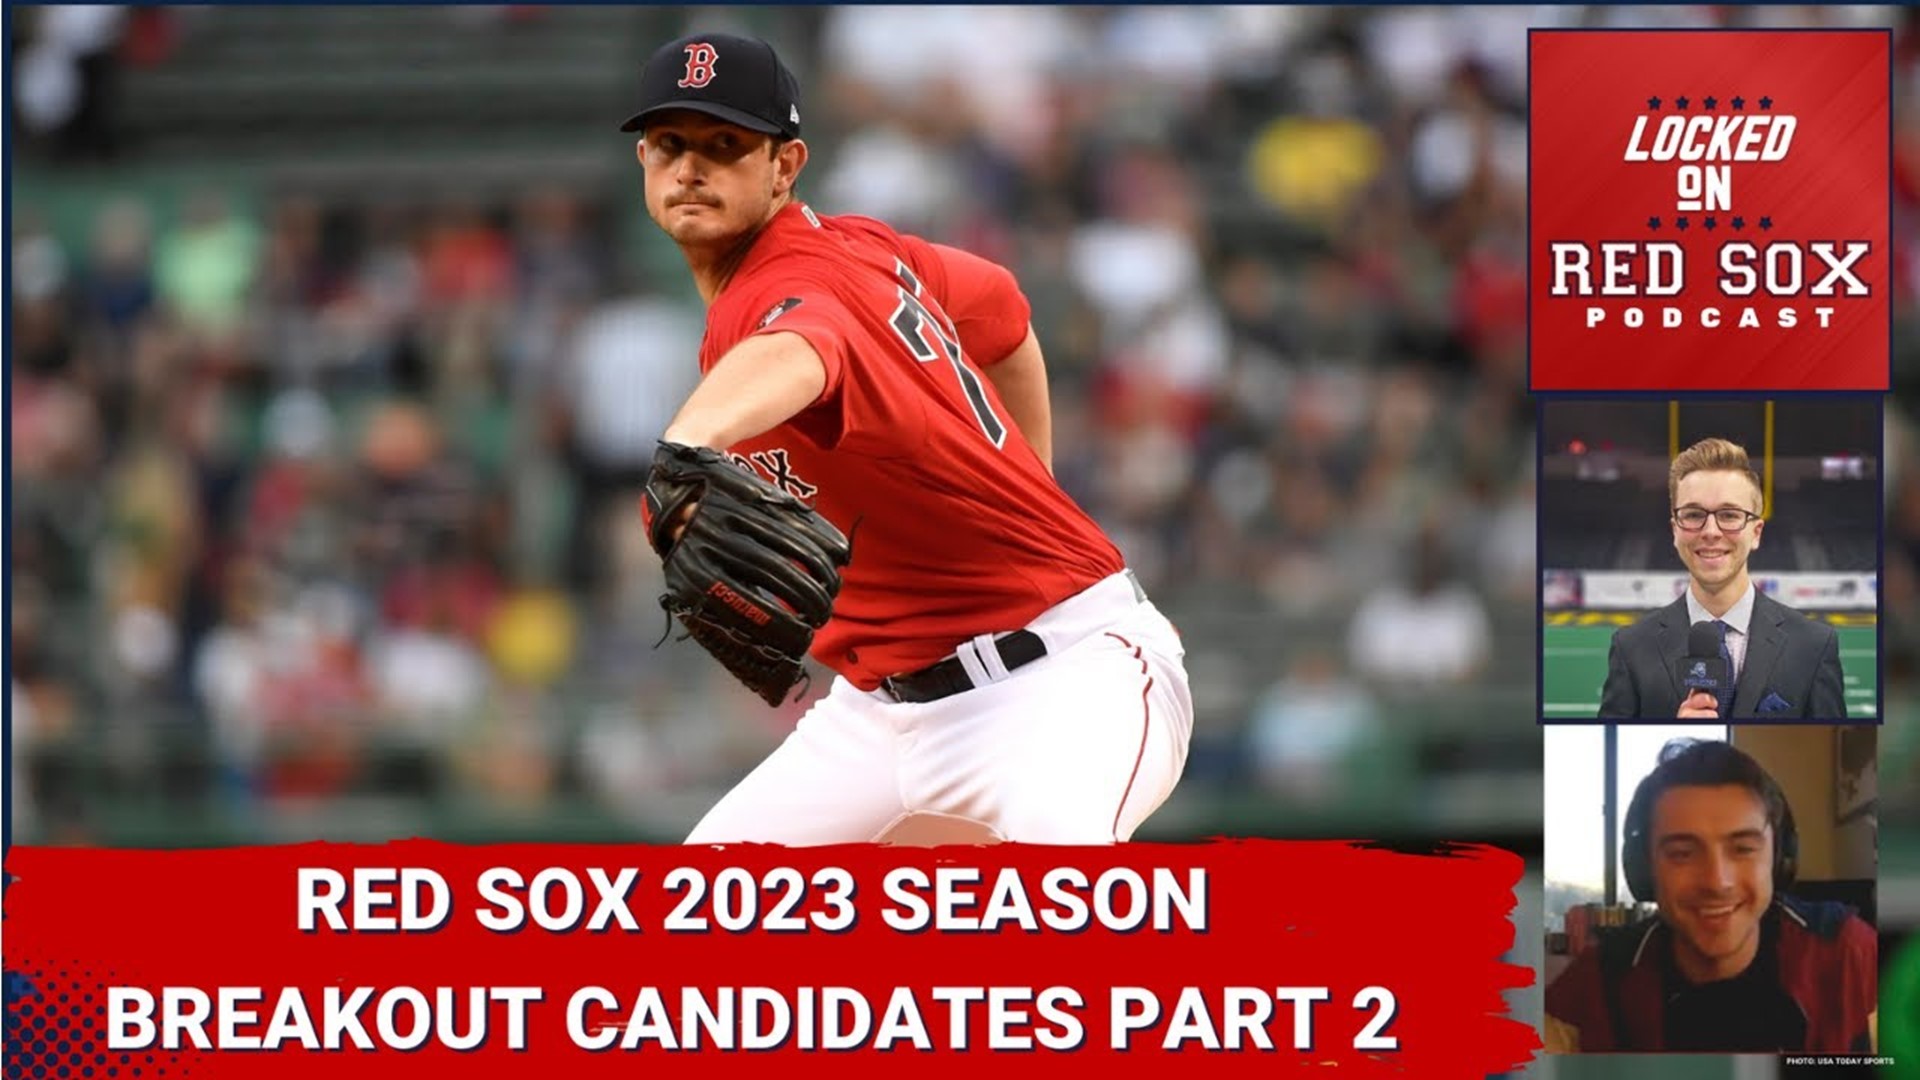 Jake Ignaszewski and Coop Leonard, a producer at Audacity talk continue their conversation discussing the Red Sox breakout candidates for the 2023 season and react t